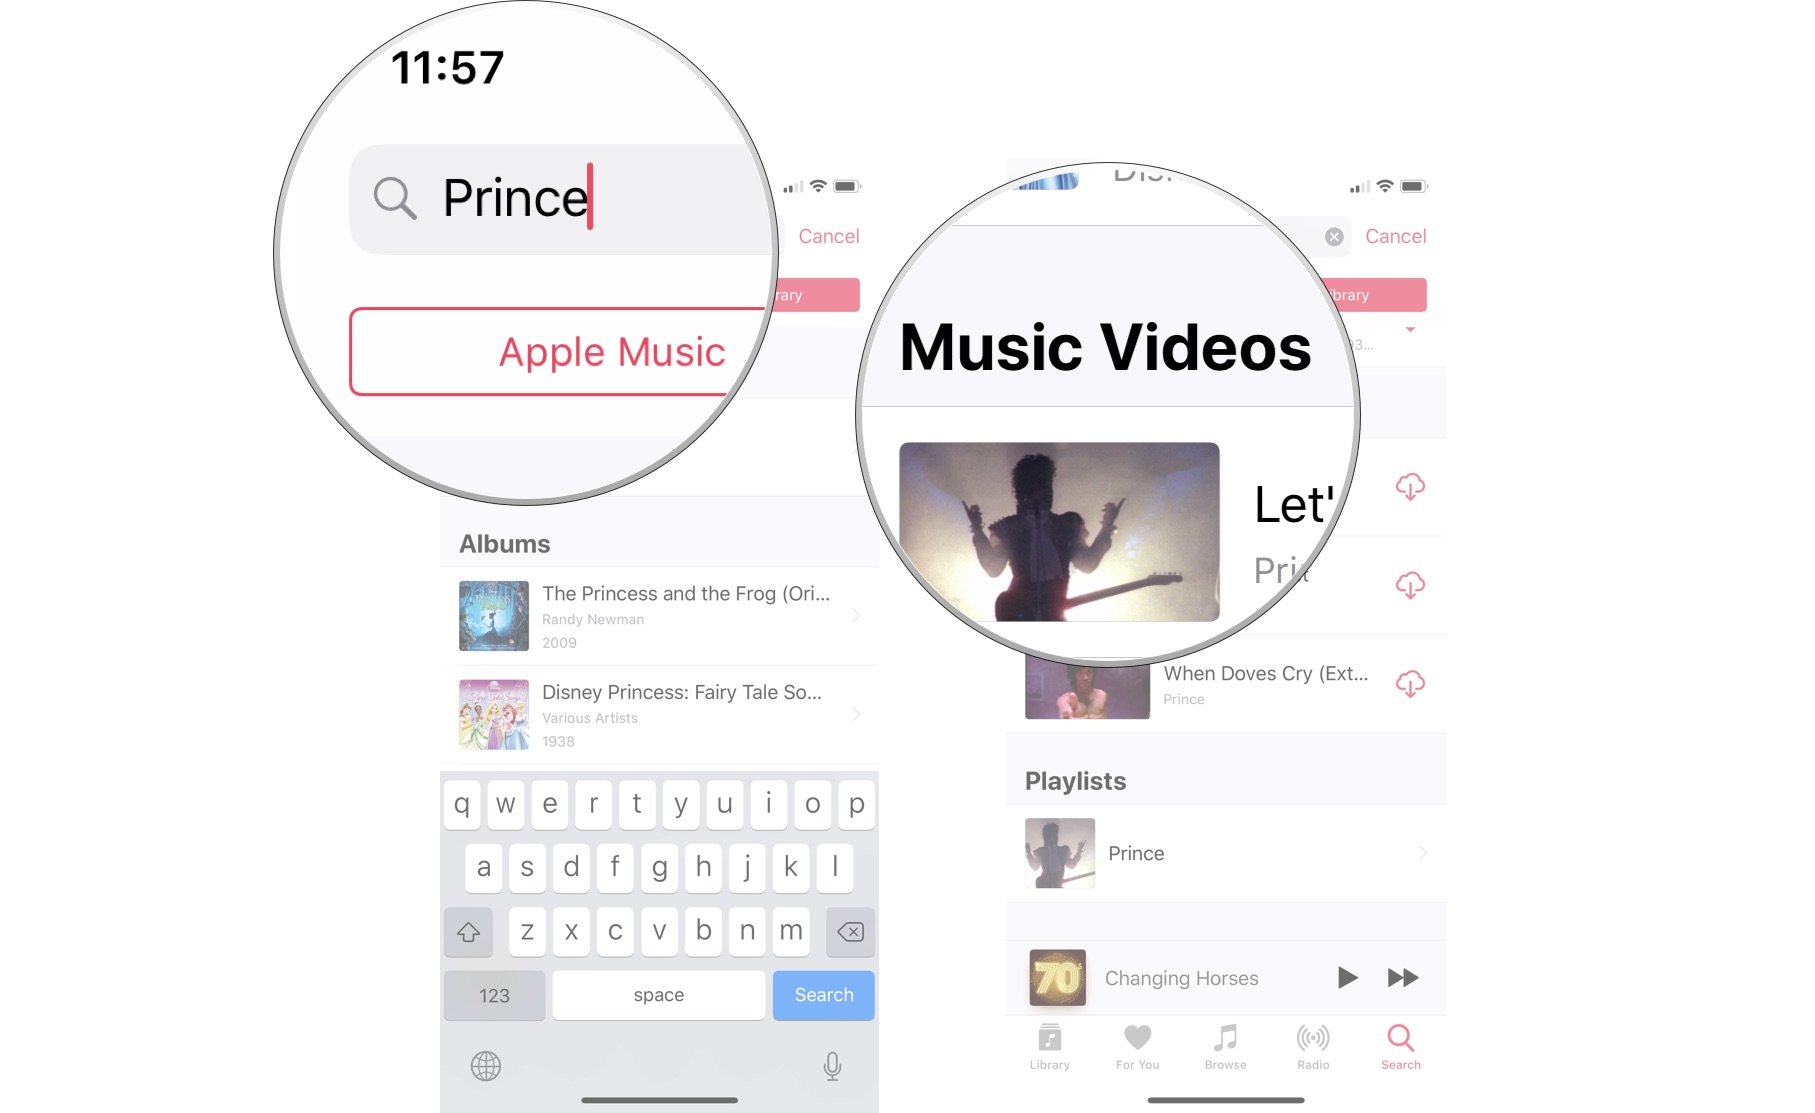 Search for Music Videos on Apple Music: Search for a specific artist or song, then select the video